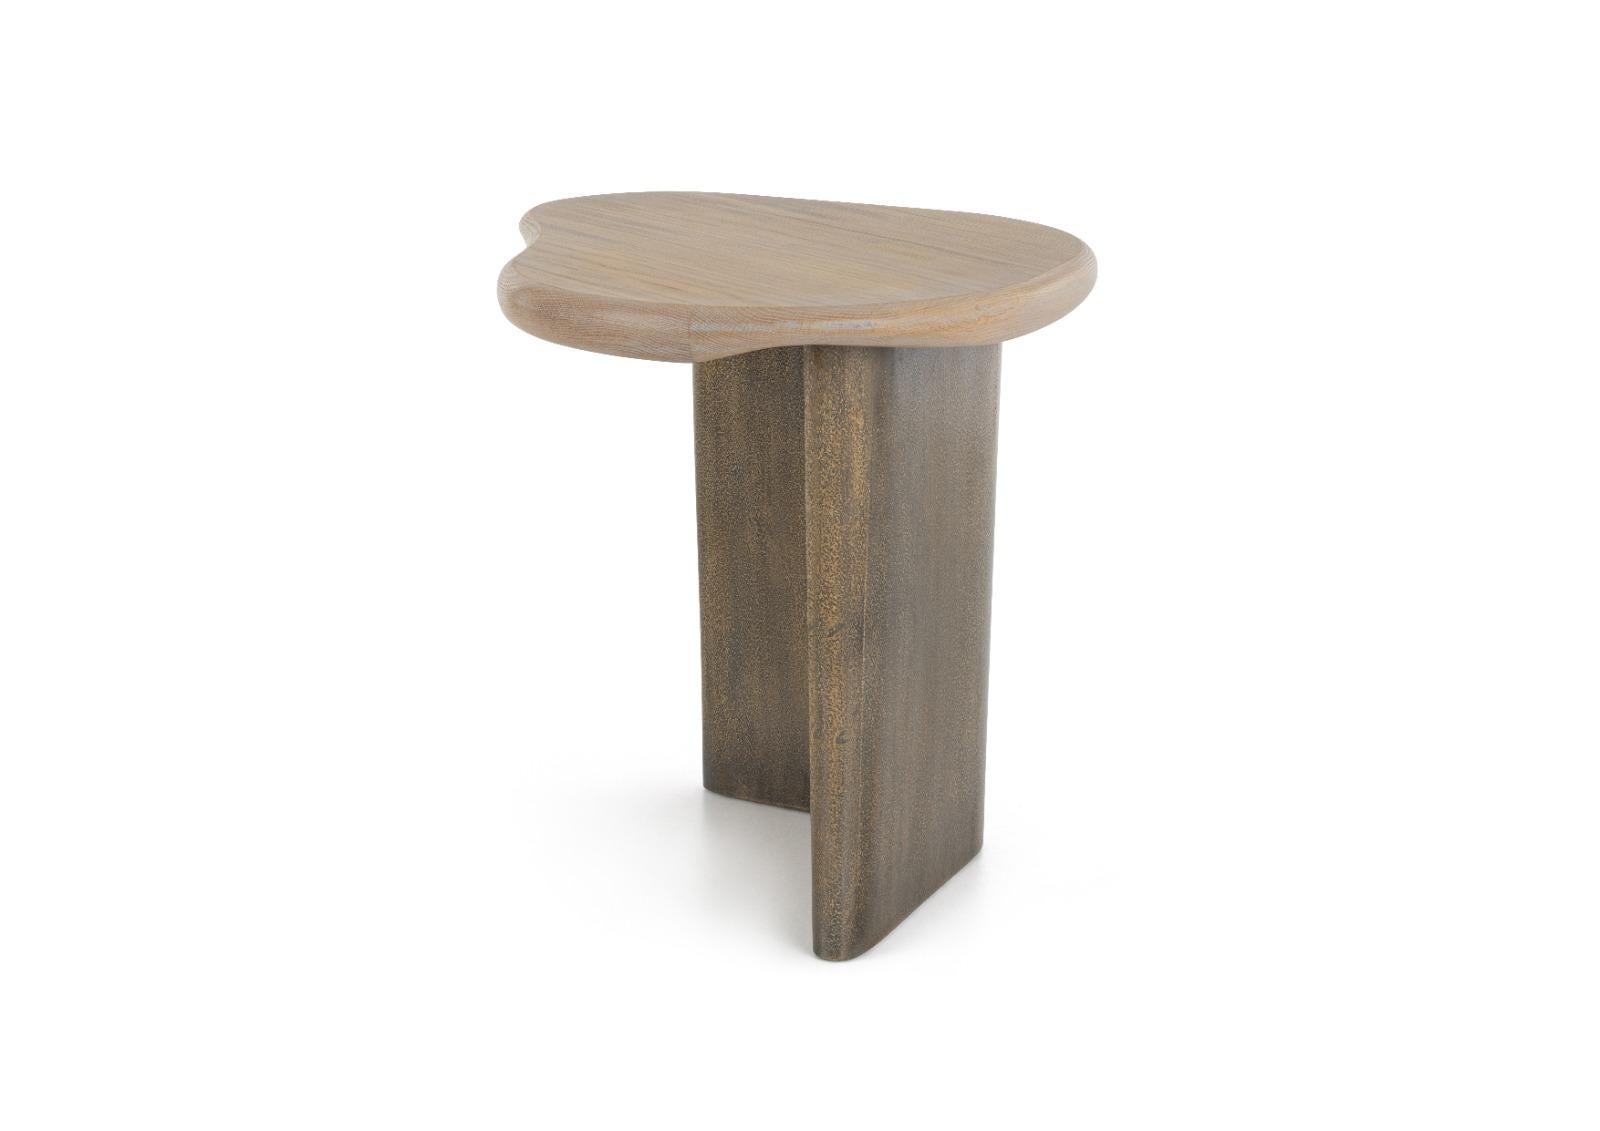 Ocean Side Table by Ekin Varon
Dimensions: D 52,5 x W 47  H 55 cm. 
Materials: Solid oak, oak veneer and wood with a high gloss patterned lacquer finish.

Dimensions and materials can be changed upon request. Please contact us.

Ocean, a side table